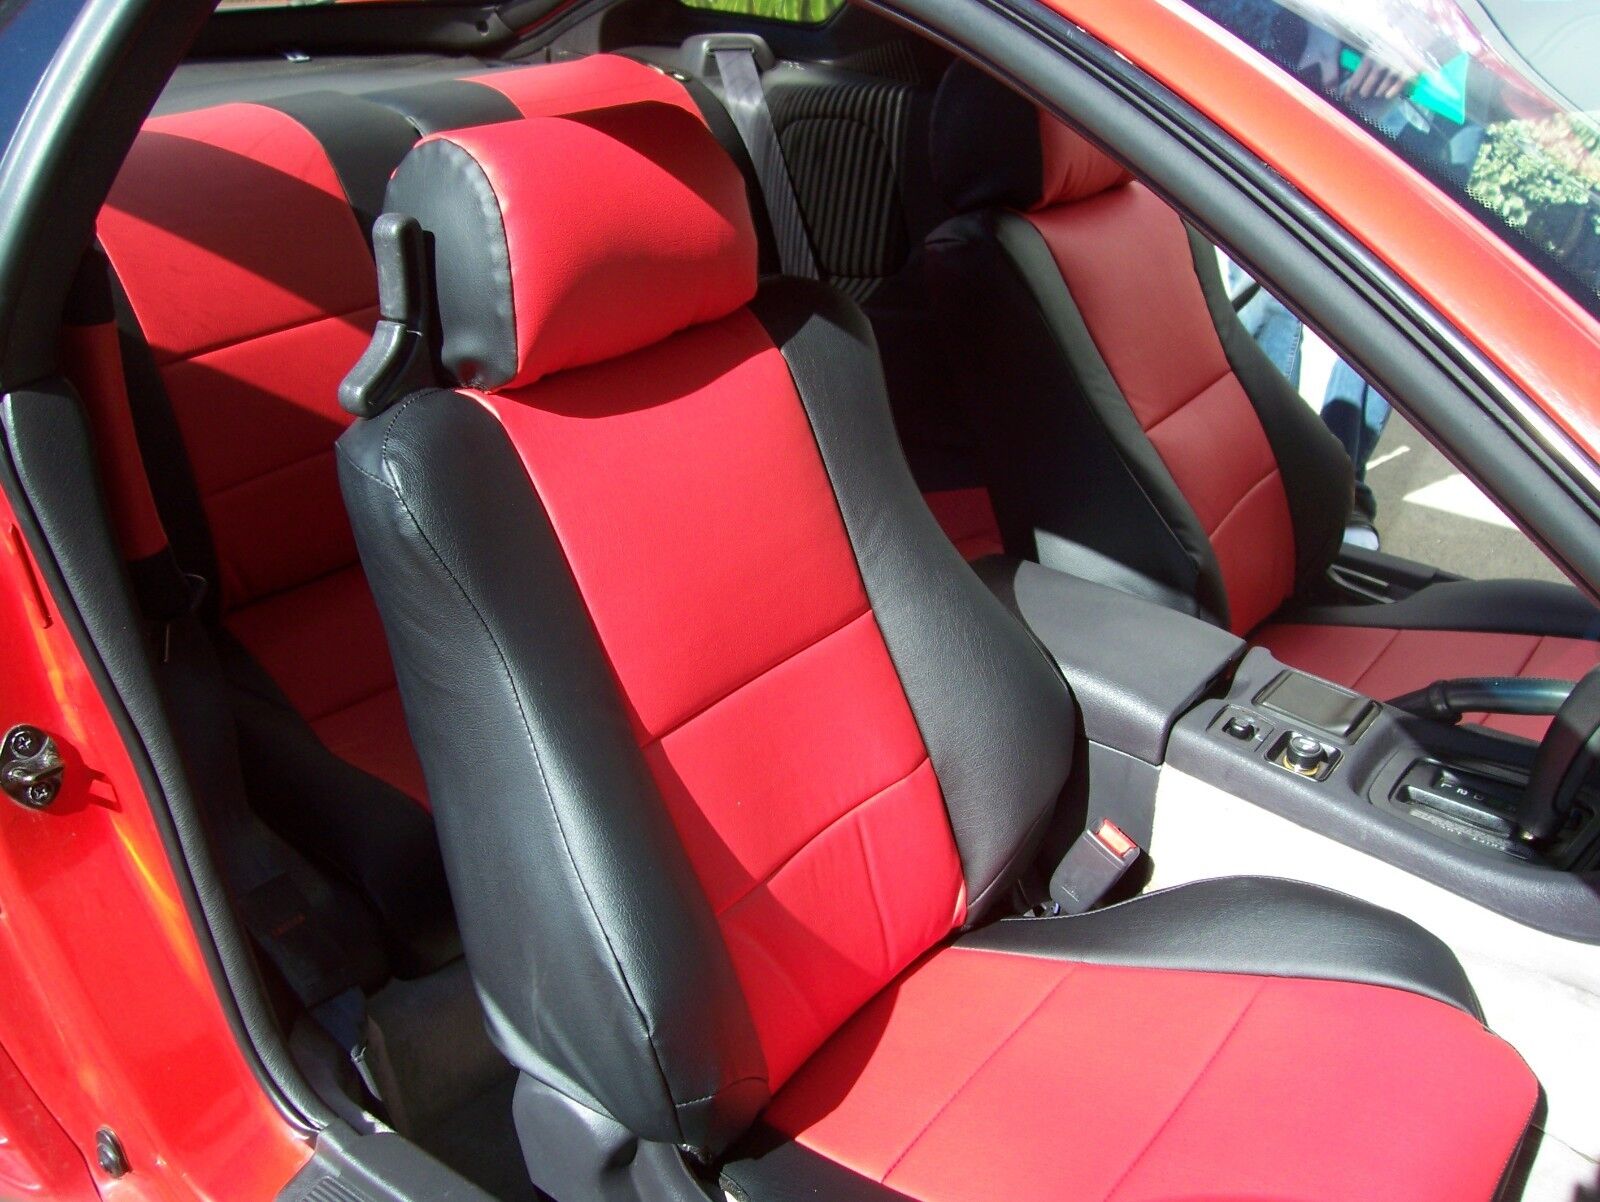 MITSUBISHI 3000GT 1991-1999 LEATHER-LIKE CUSTOM SEAT COVERS 13 COLORS AVAILABLE